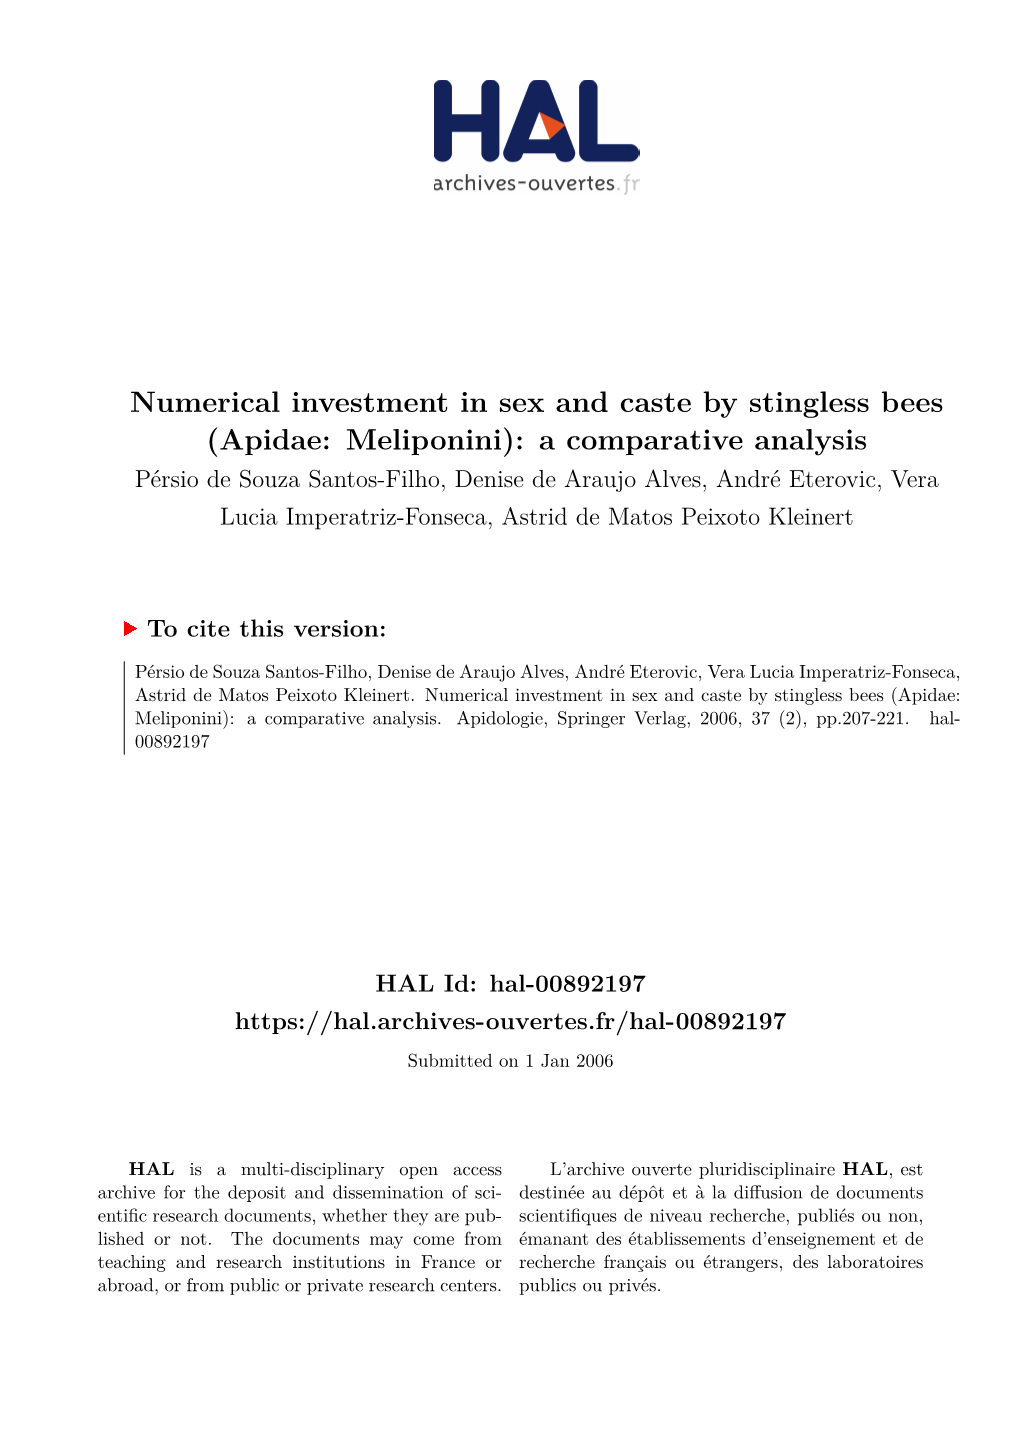 Numerical Investment in Sex and Caste by Stingless